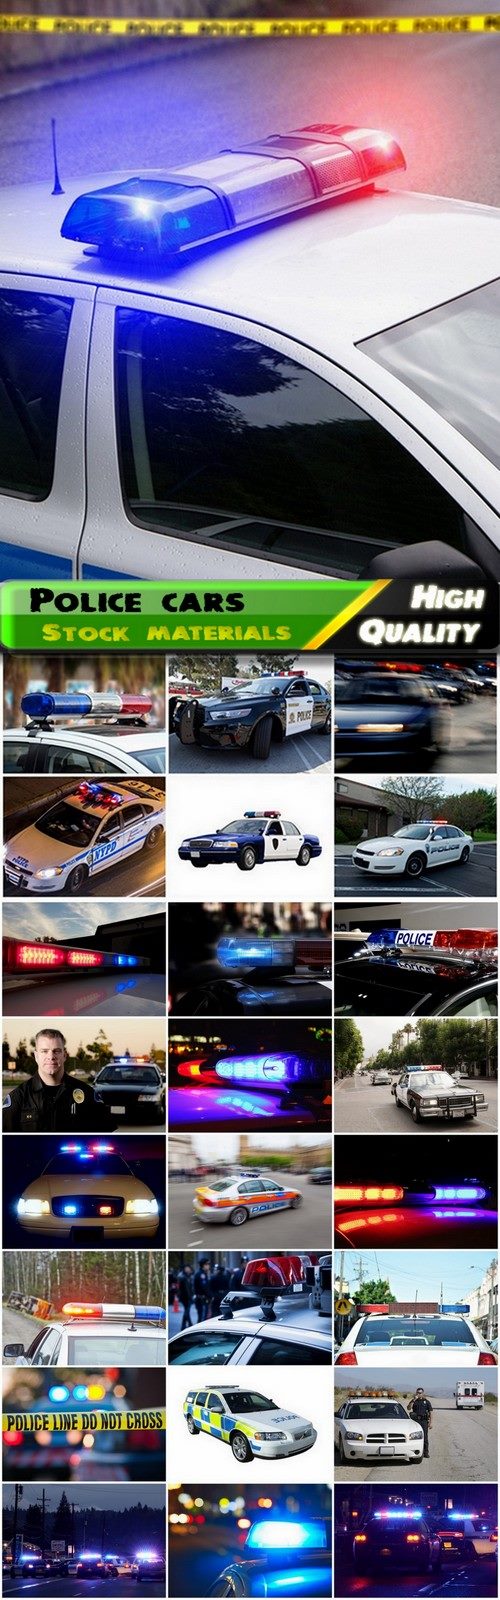 Police cars with red-blue flashing lights - HQ Jpg